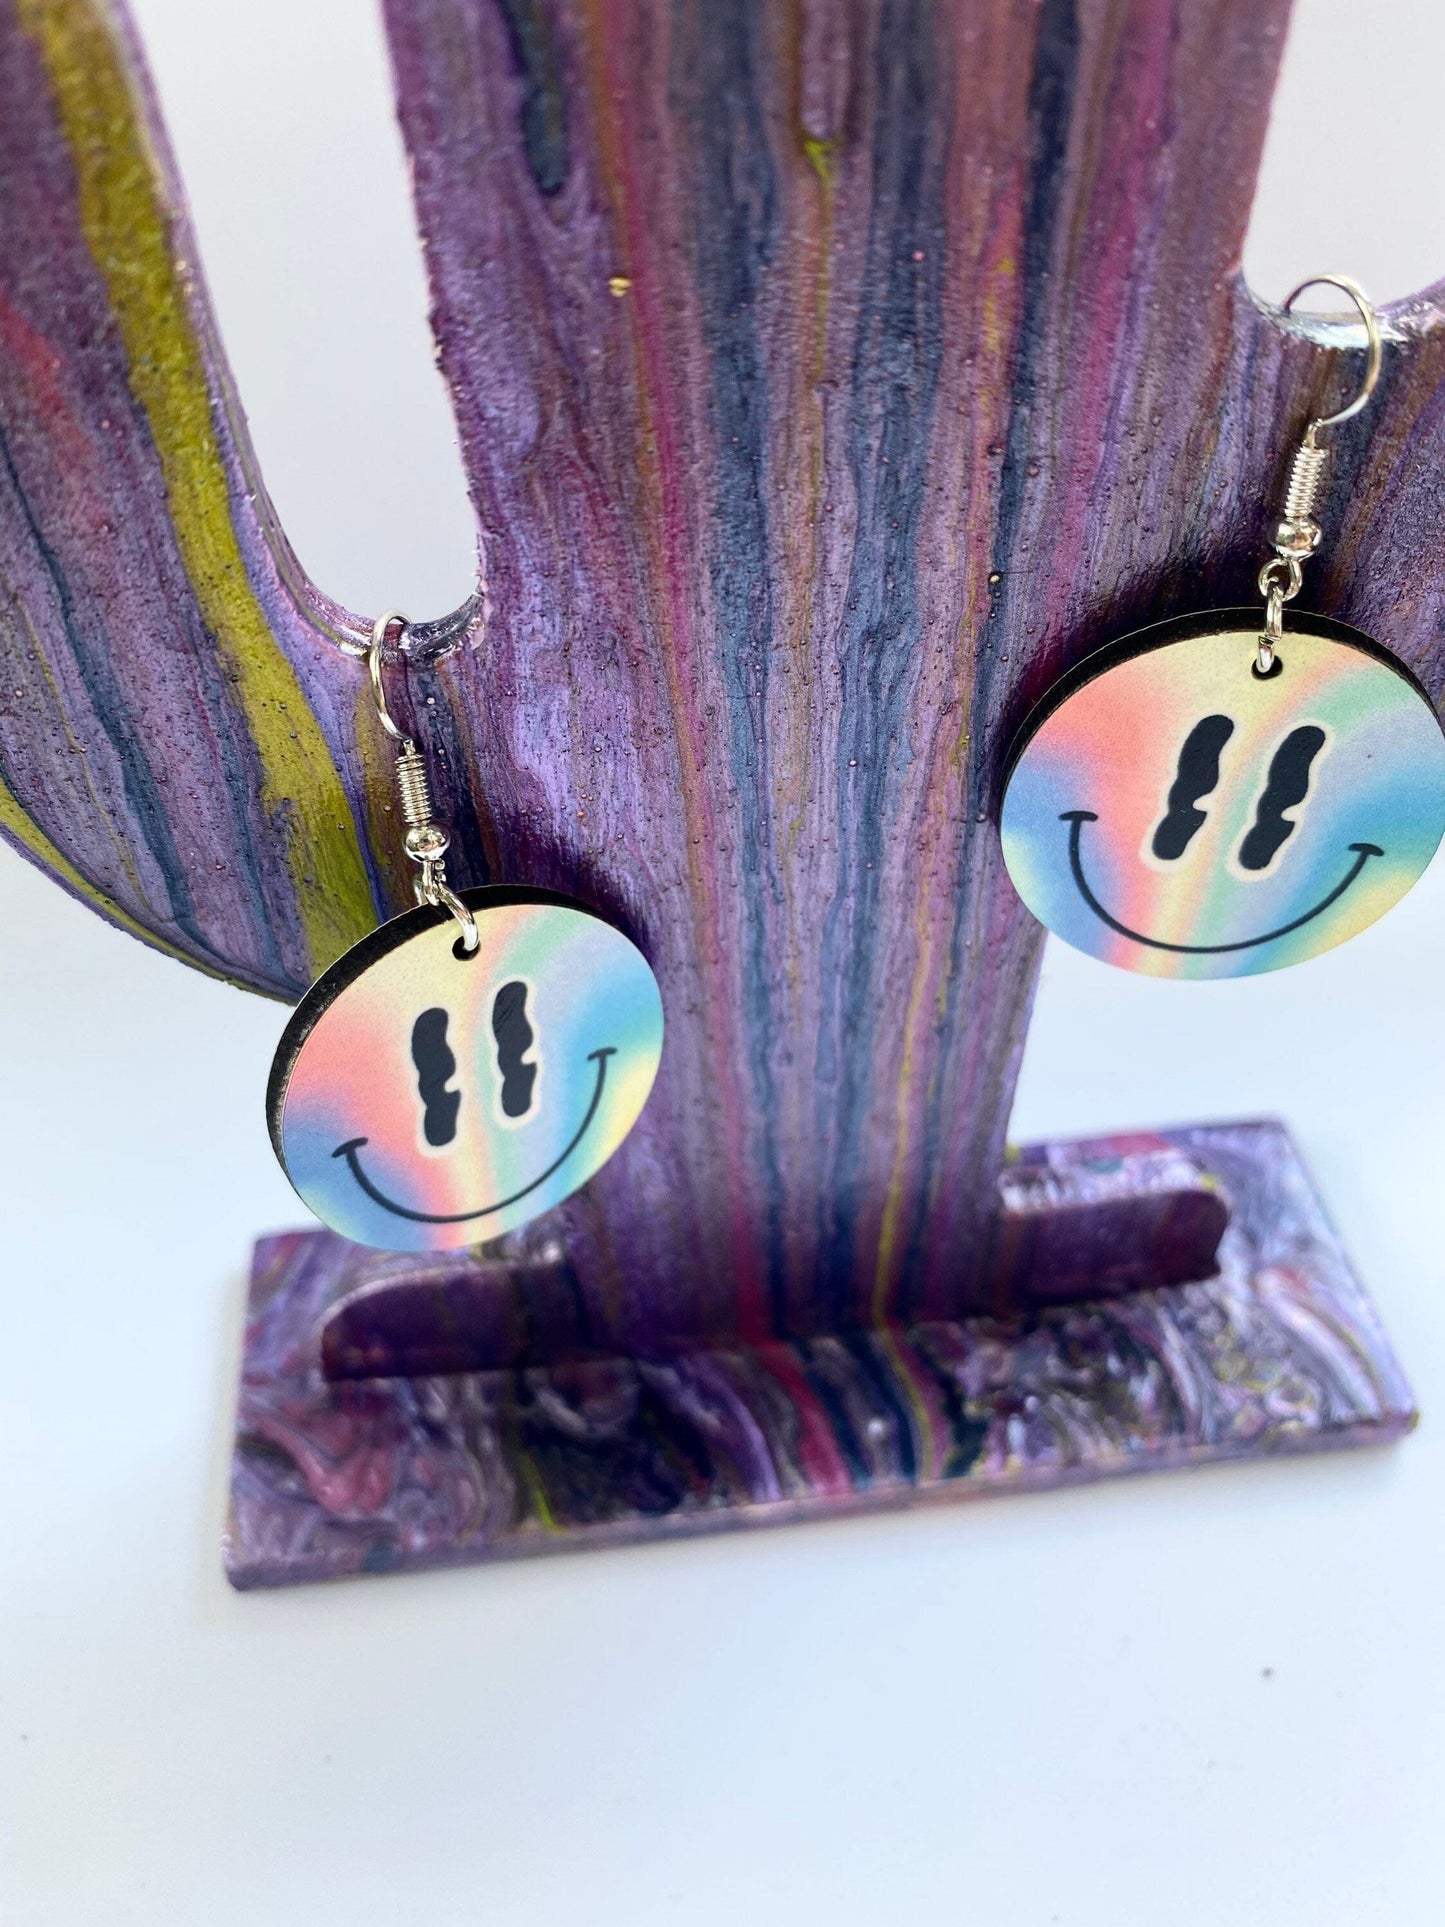 Shadow Witch Designs Rainbow Melting Smiley Face Earrings 1264385095